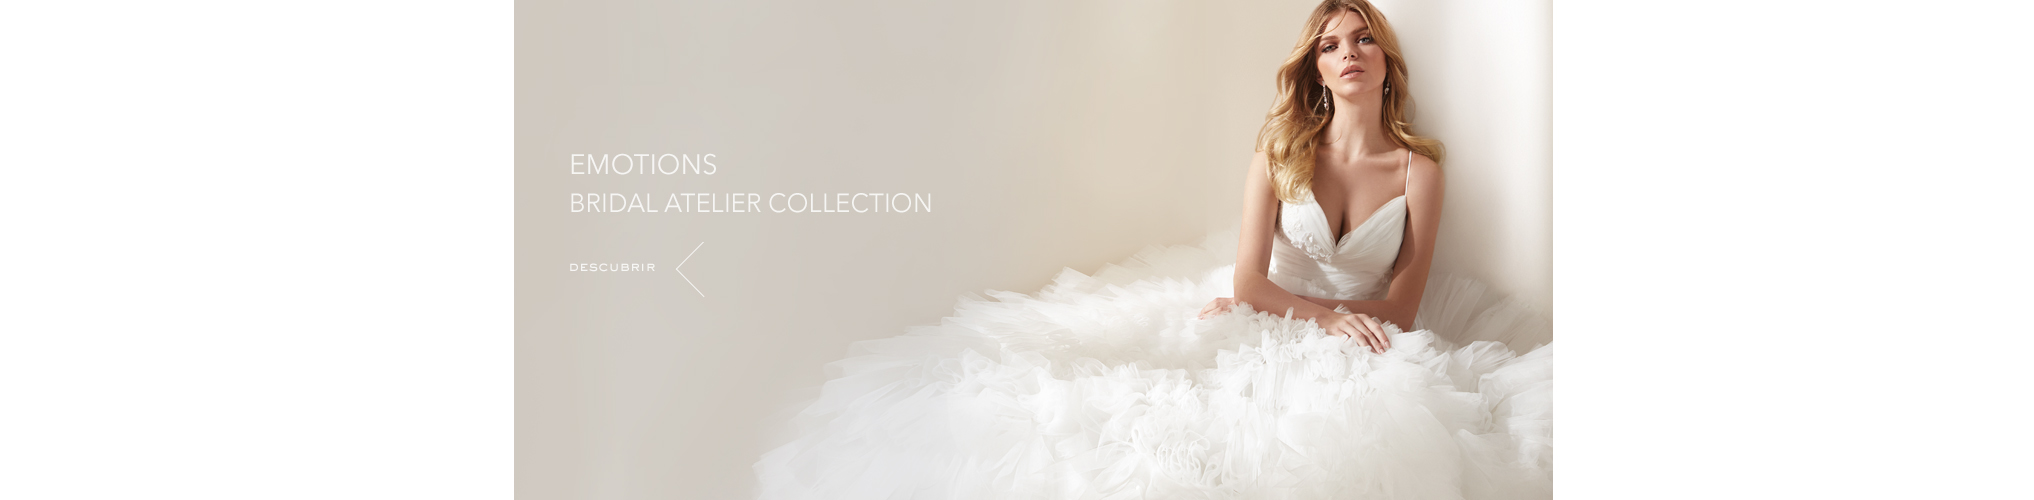 EMOTIONS / ATELIER BRIDAL COLLECTION